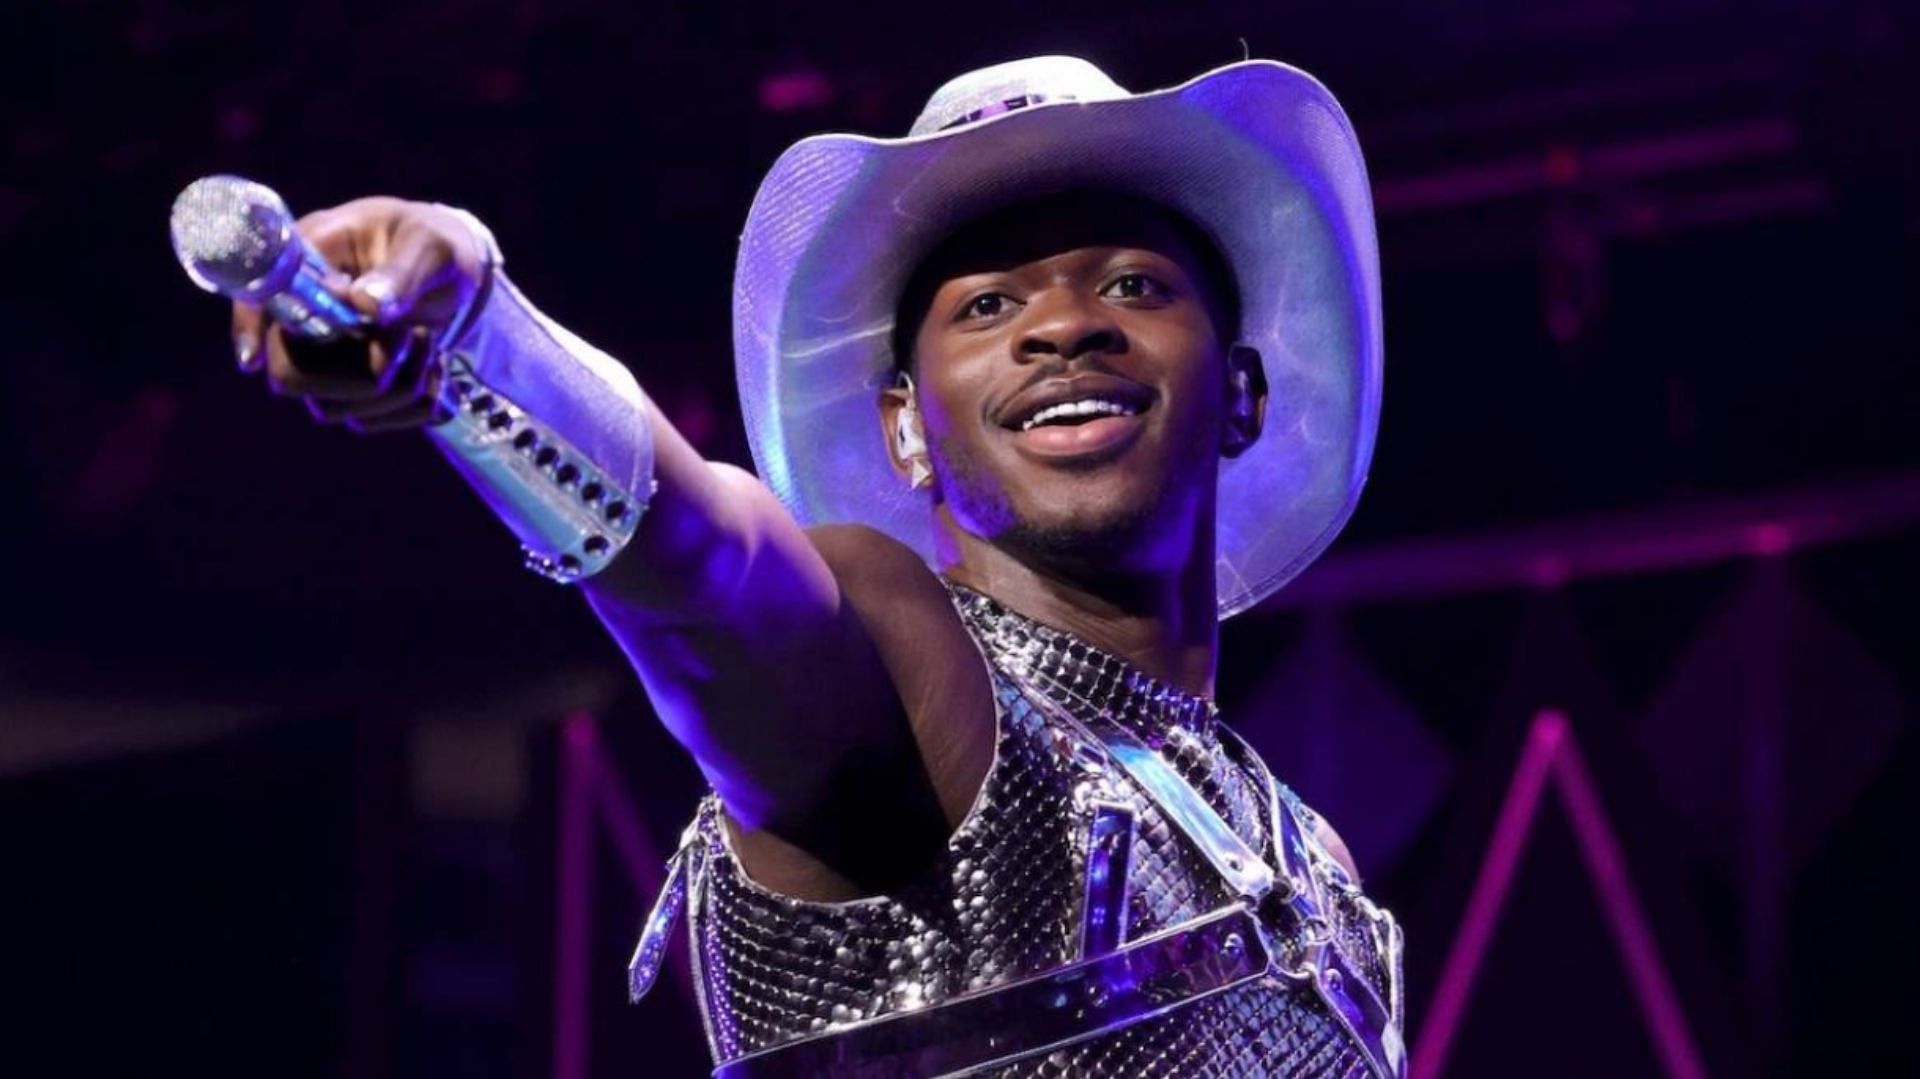 Lil Nas paused his concert to go to the toilet mid-performance. (Image via Getty)